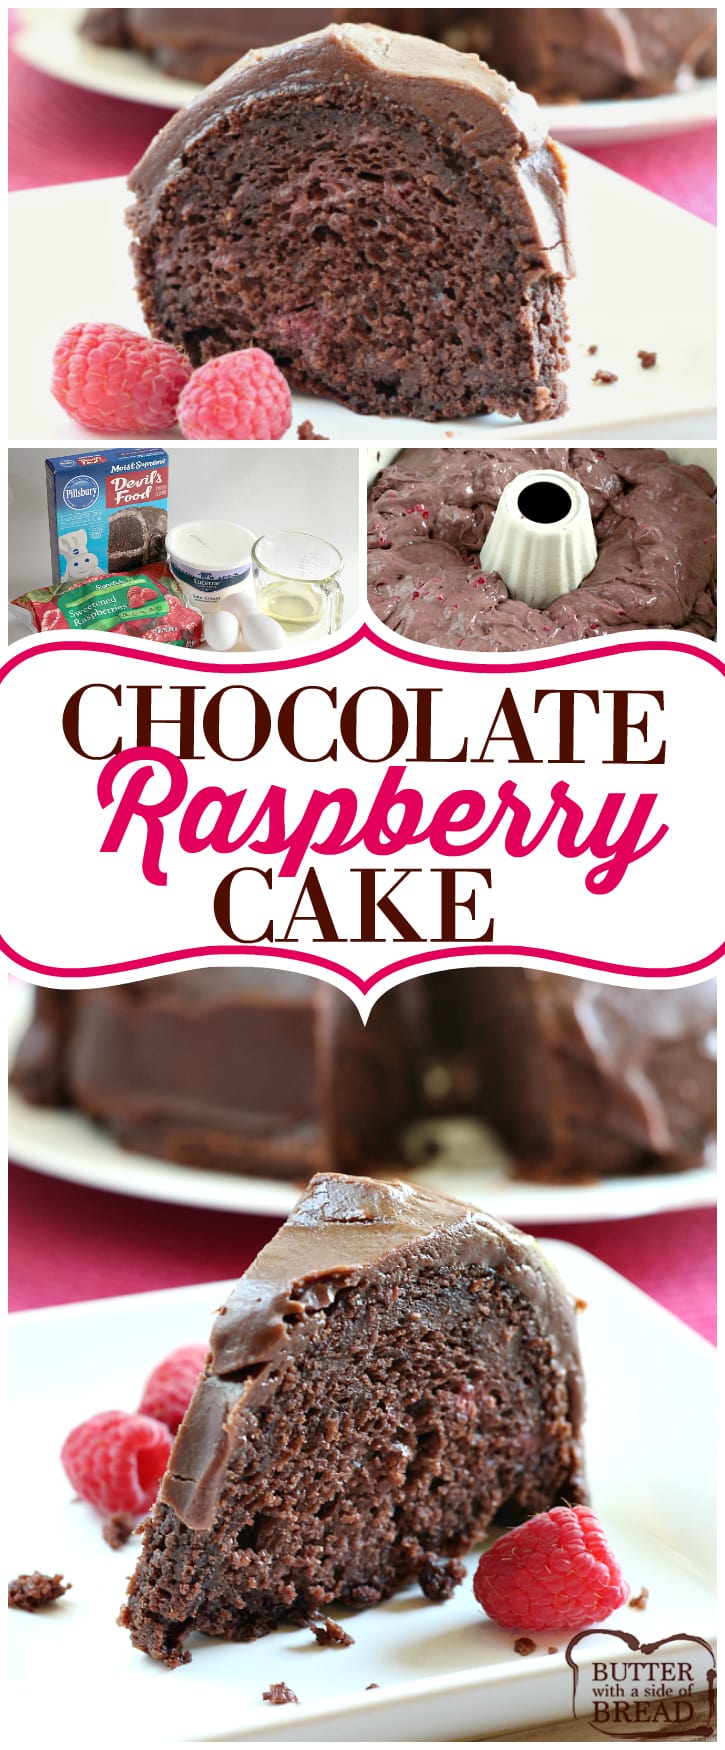 Easy cake recipe that's absolutely INCREDIBLE! Just 5 ingredients and everyone loves the chocolate raspberry combination! This Chocolate Raspberry Cake starts with a cake mix and a bag of frozen raspberries and it is so delicious, no one will ever guess how easy it is to make! Best chocolate cake recipe from Butter With A Side of Bread